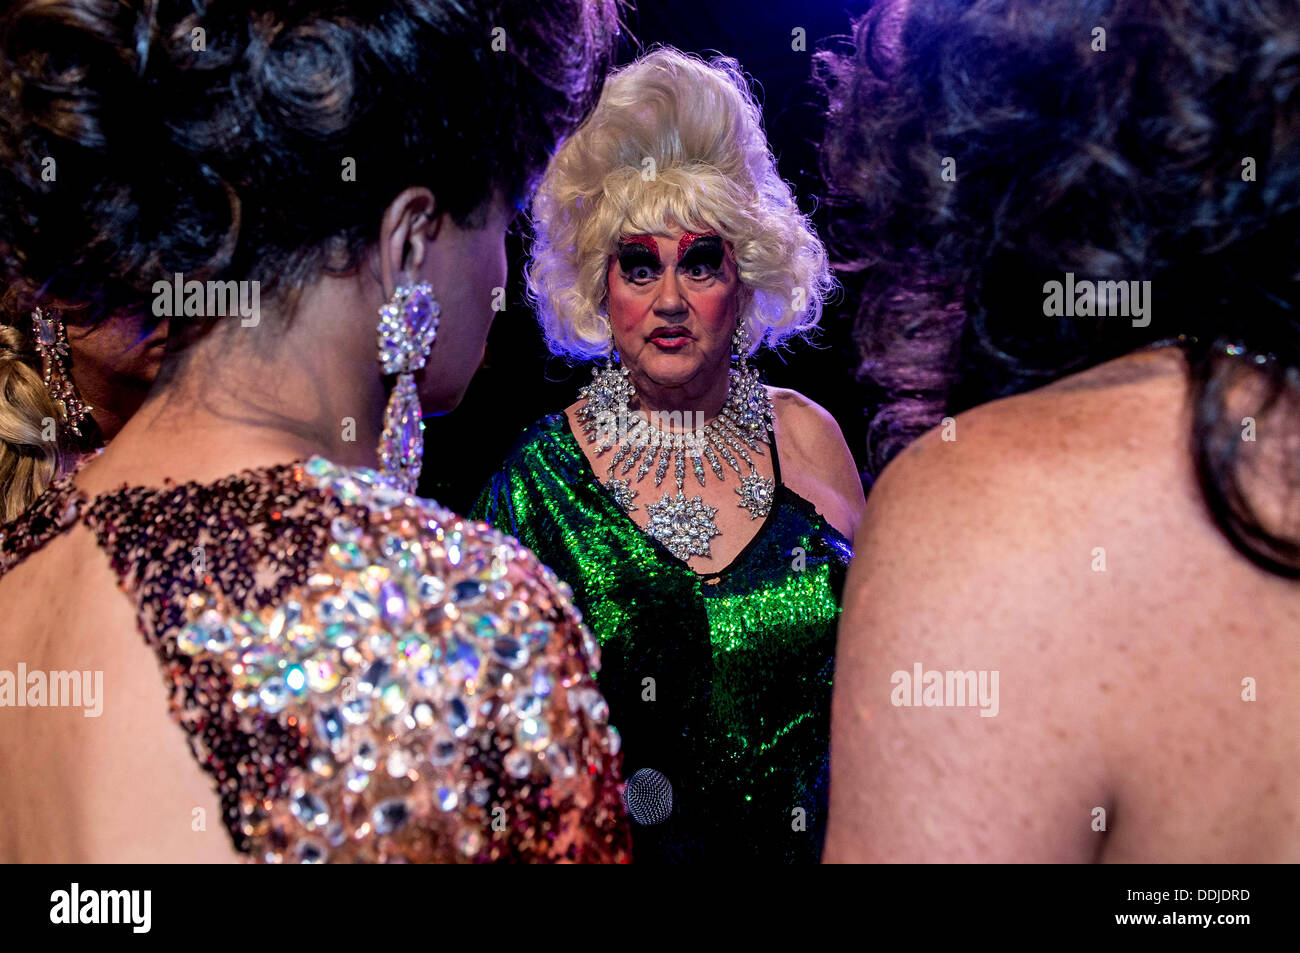 Portland, Oegon, USA. 01st Sep, 2013. DARCELLE, who has produced the La Femme Magnifique International Pageant for female impersonators for 32 years, speaks with contestants and friends after announcing that the 2013 pageant would be the very last one. La Femme contestants, anatomically correct males who adhere to a strict set of rules prohibiting surgical or hormonal changes to their bodies, rely on their illusionary artistry to wow the judges in four categories: formal, theme, talent and showgirl. However, it has become increasingly difficult to find contestants who've not taken hormon Stock Photo